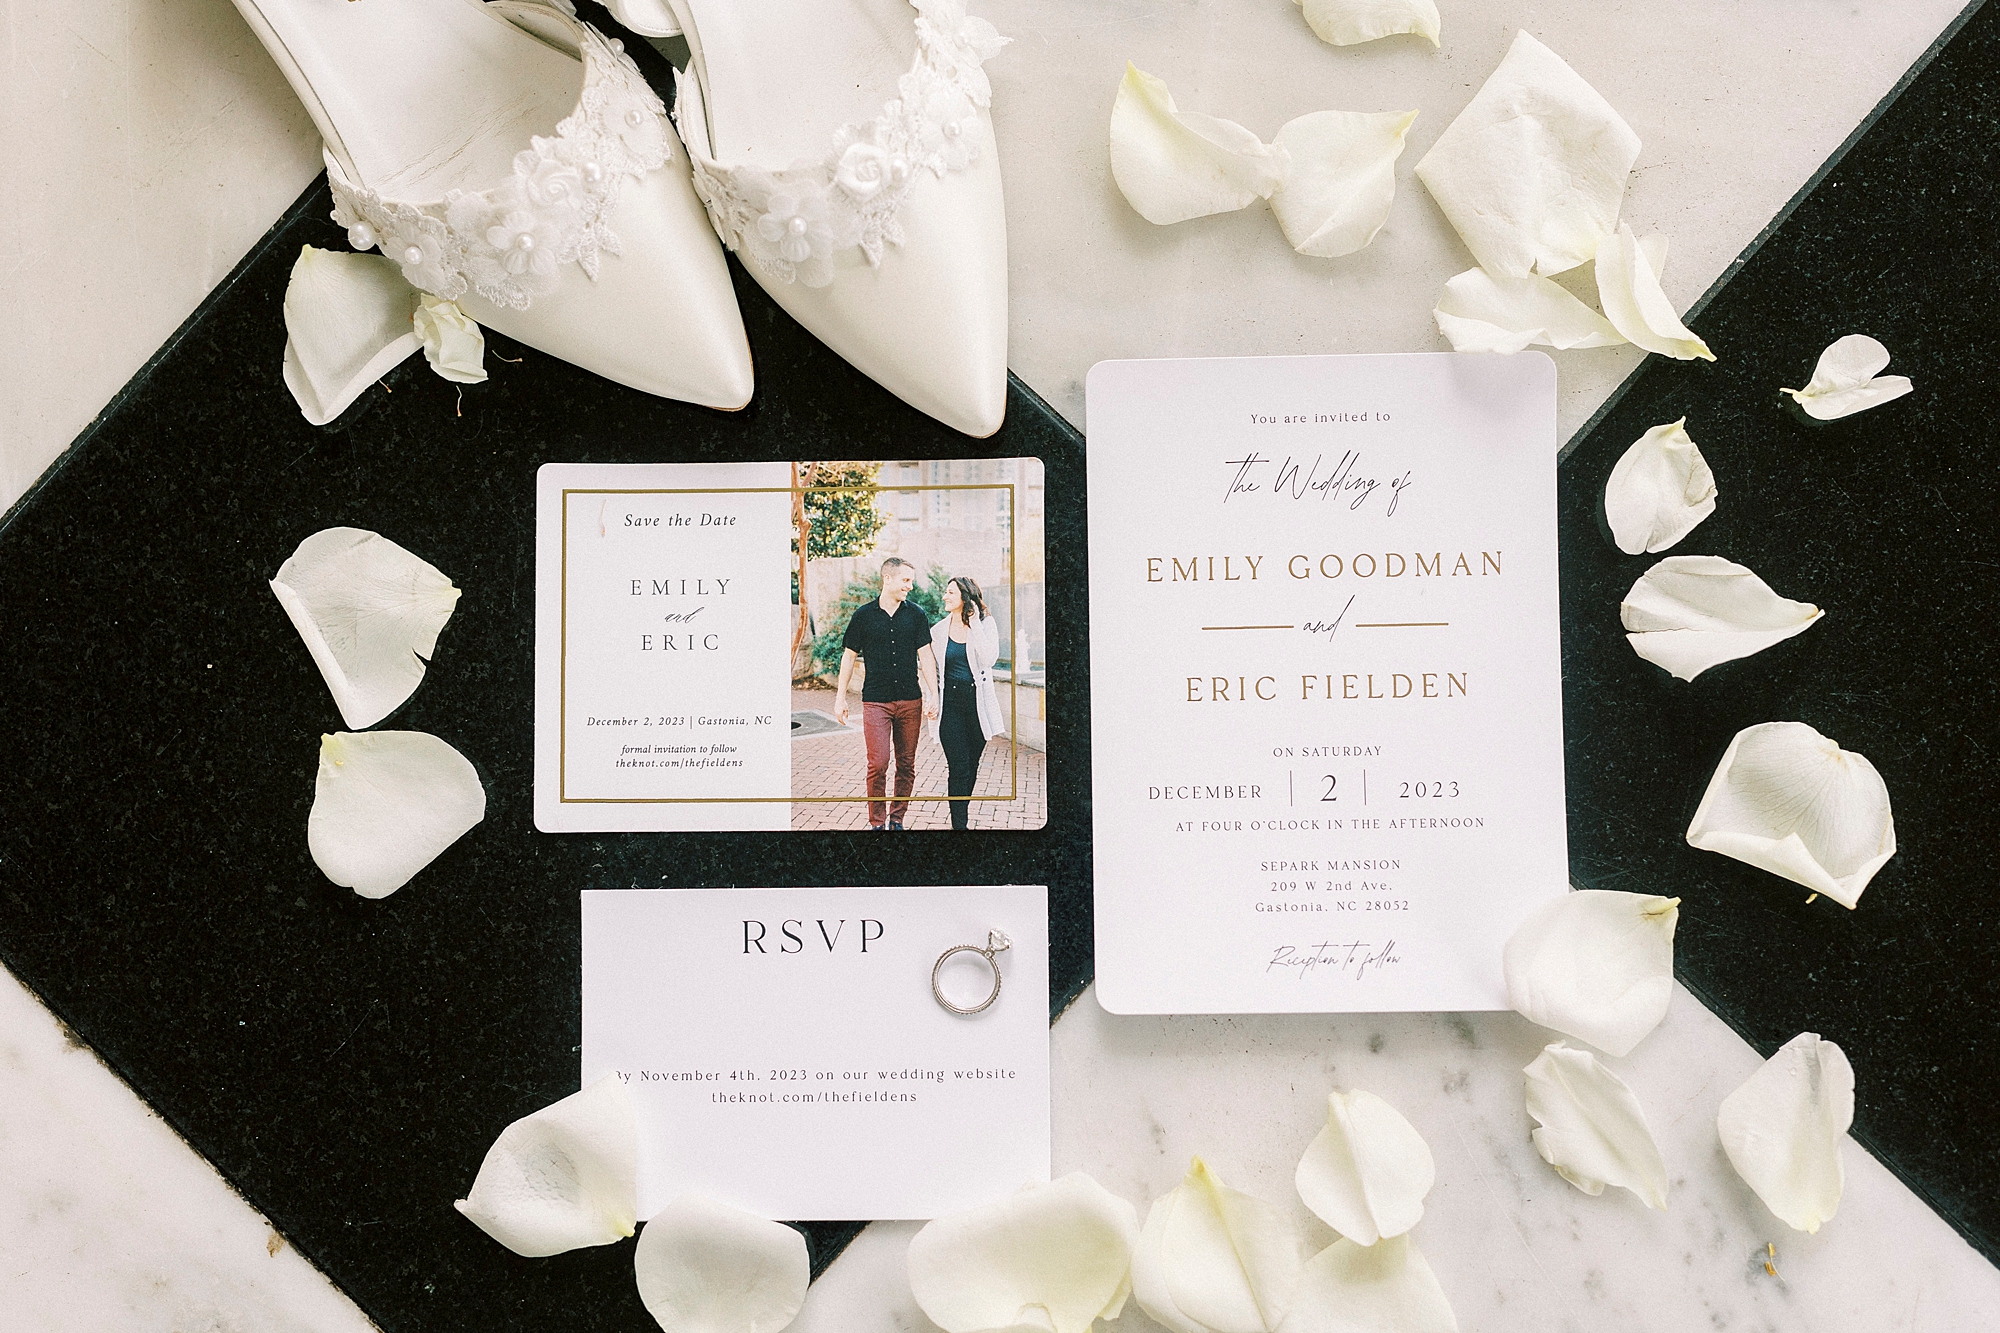 bride's ivory shoes and white flower petals on black and white floor around invitation suite 